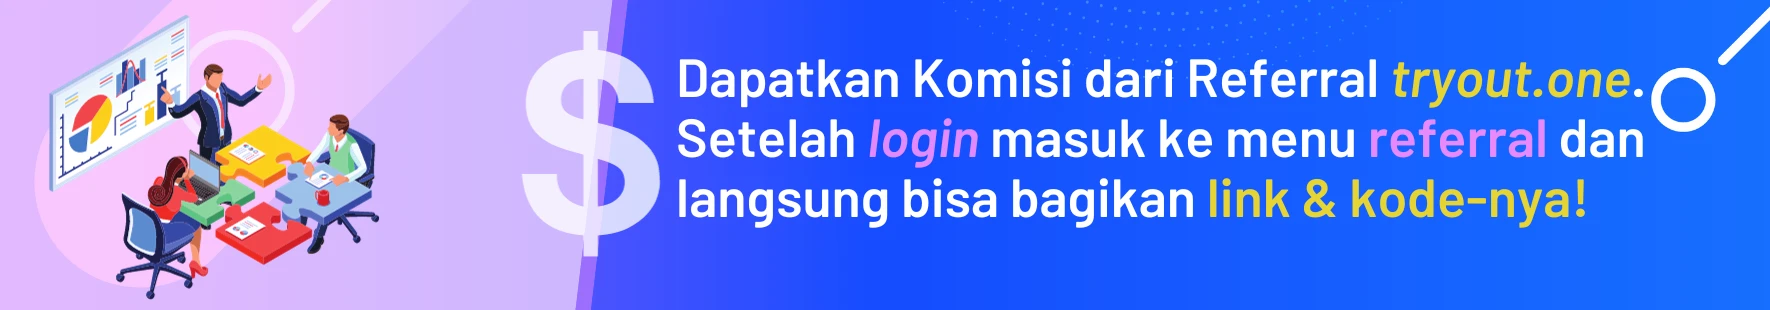 Komisi Referral Tryout